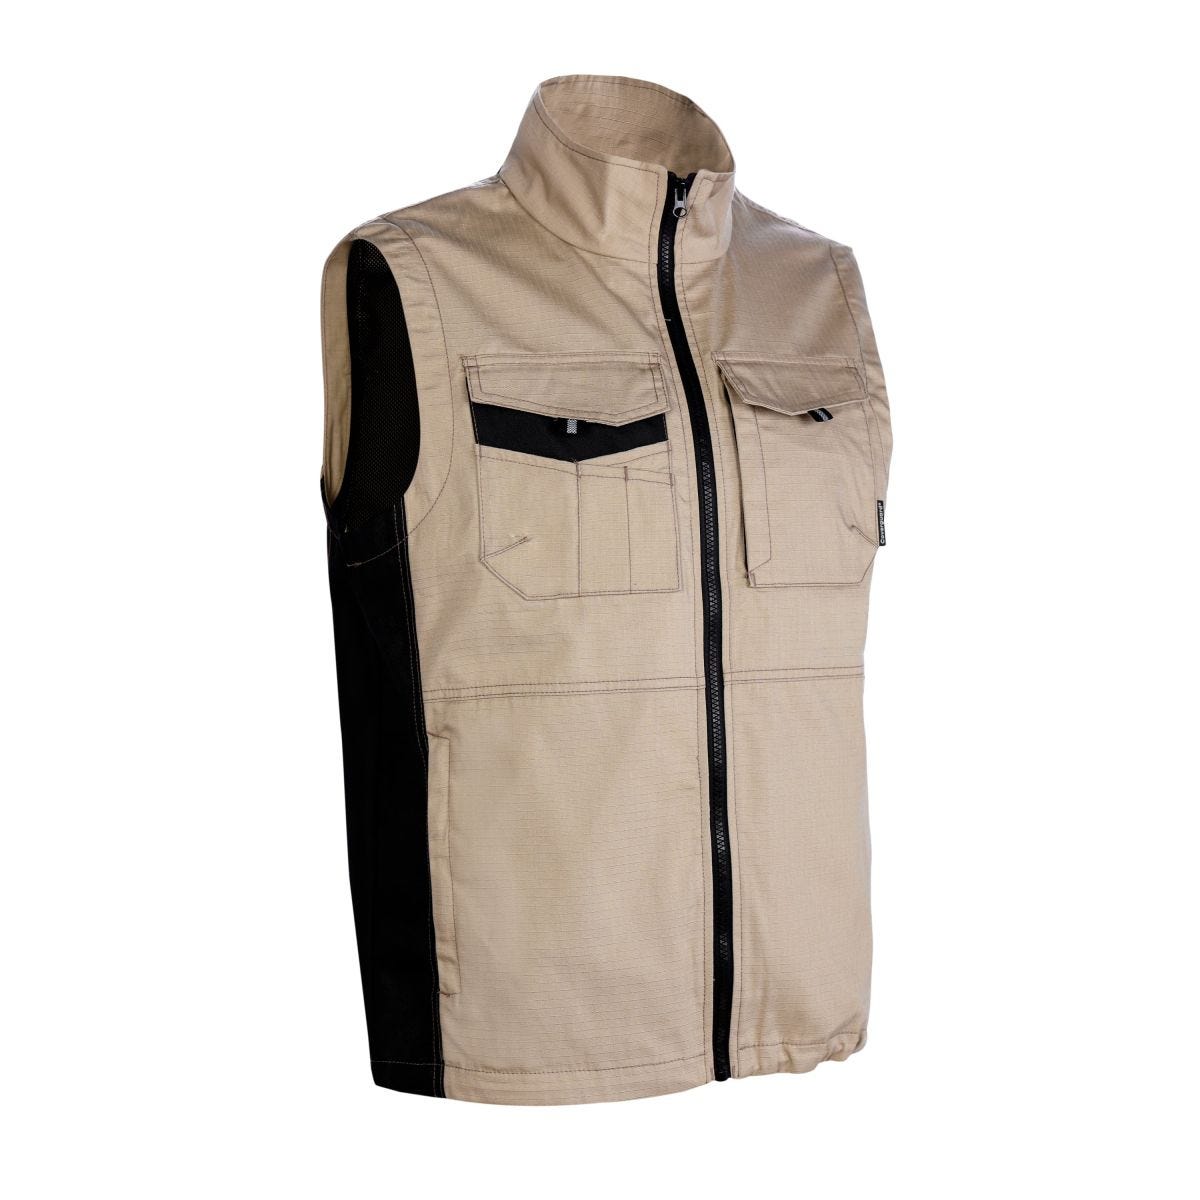 OROSI Gilet Sable, 65%PES/35%CO, 240g/m² - COVERGUARD - Taille S 0